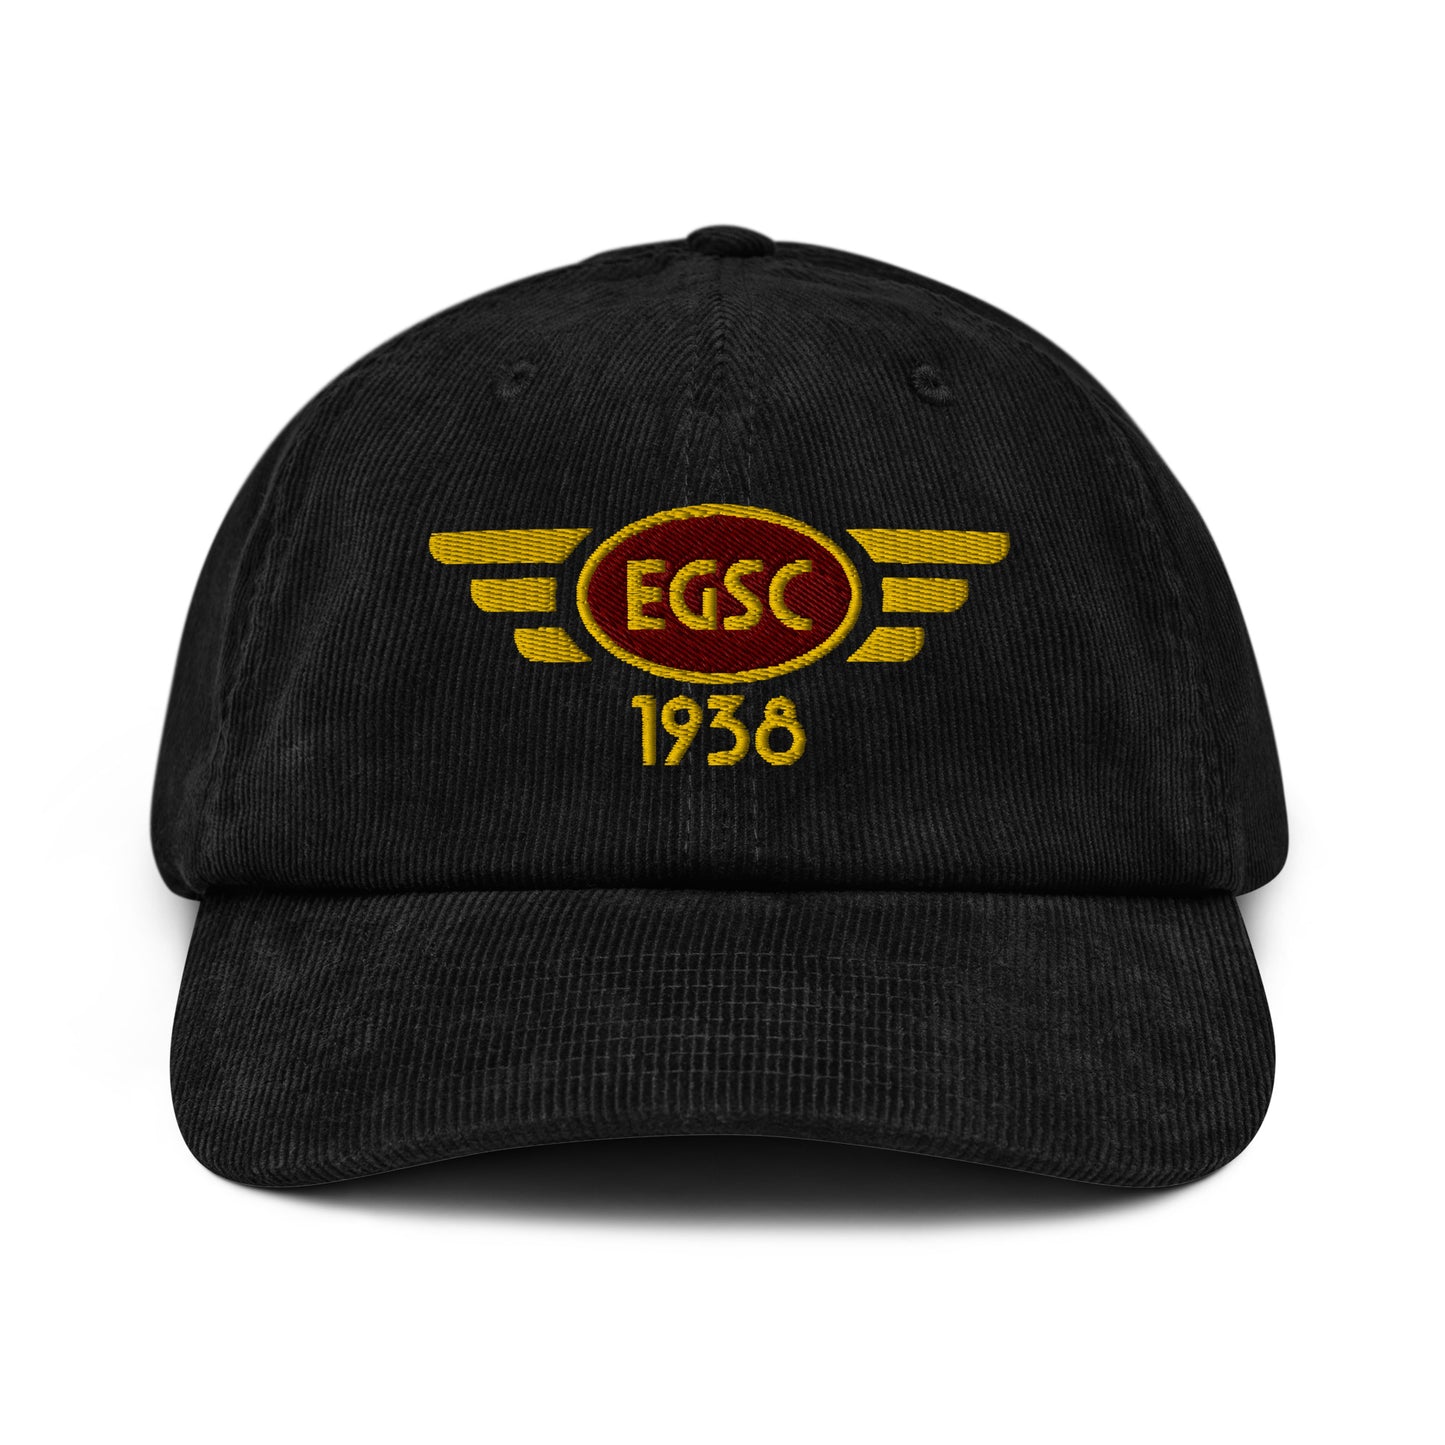 Cambridge Airport corduroy cap with embroidered ICAO code.